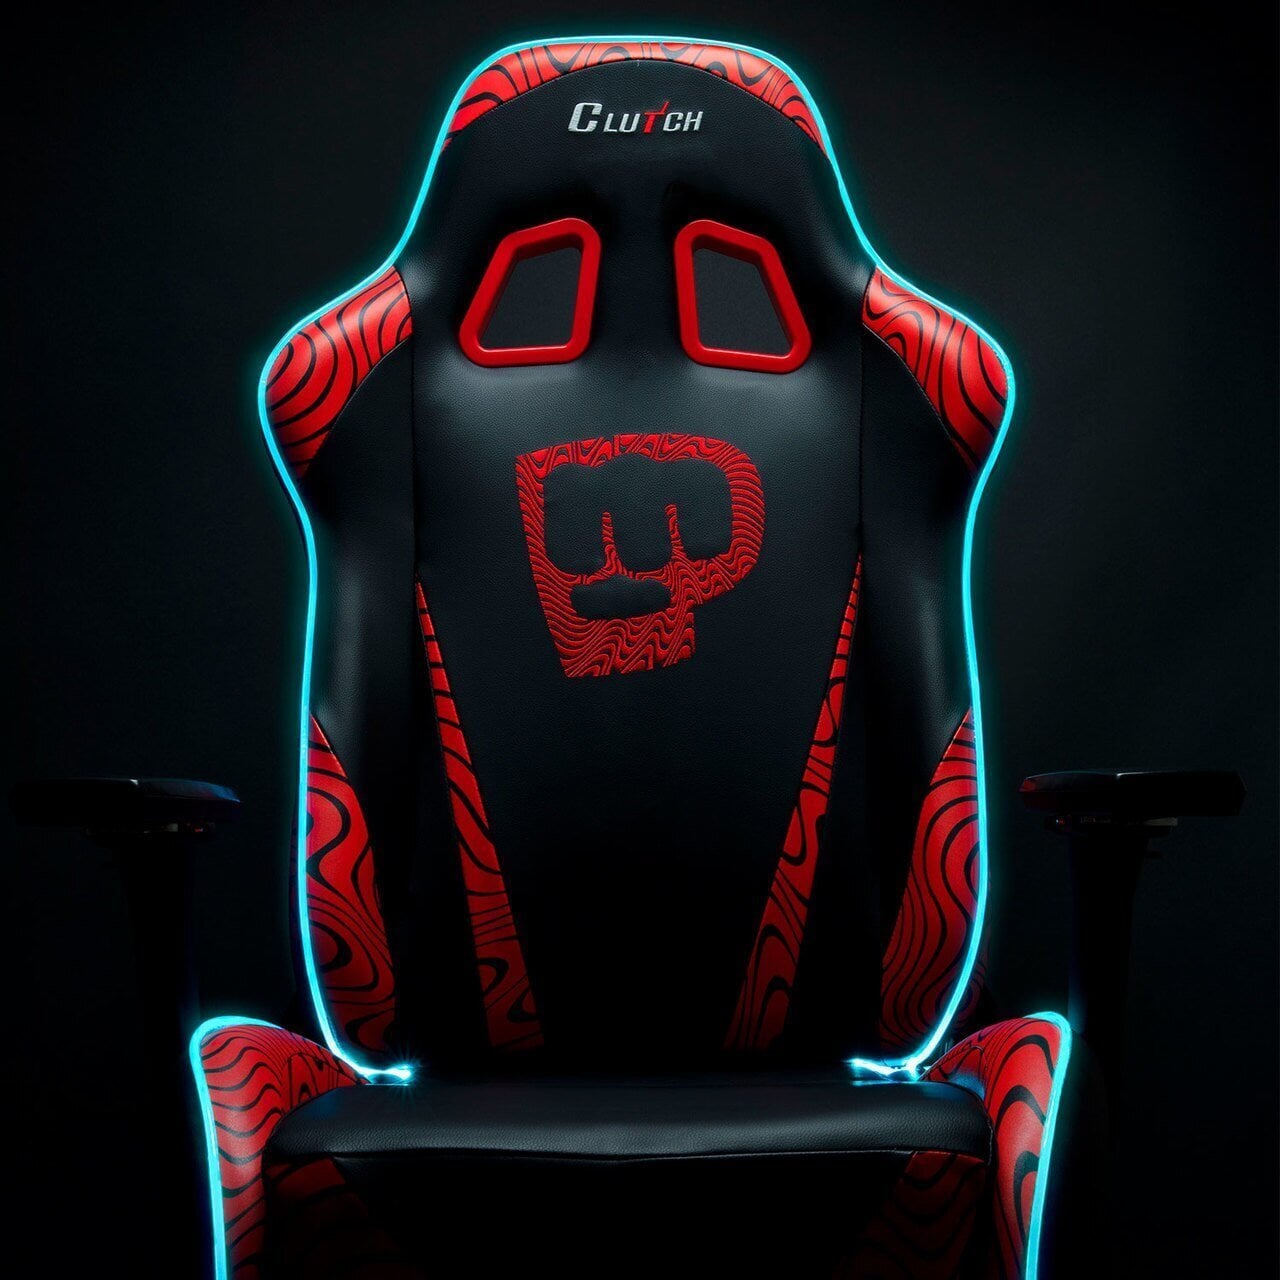 Pewdiepie LED Edition - Throttle Series Gaming Chair Clutch Chairz XL LED 